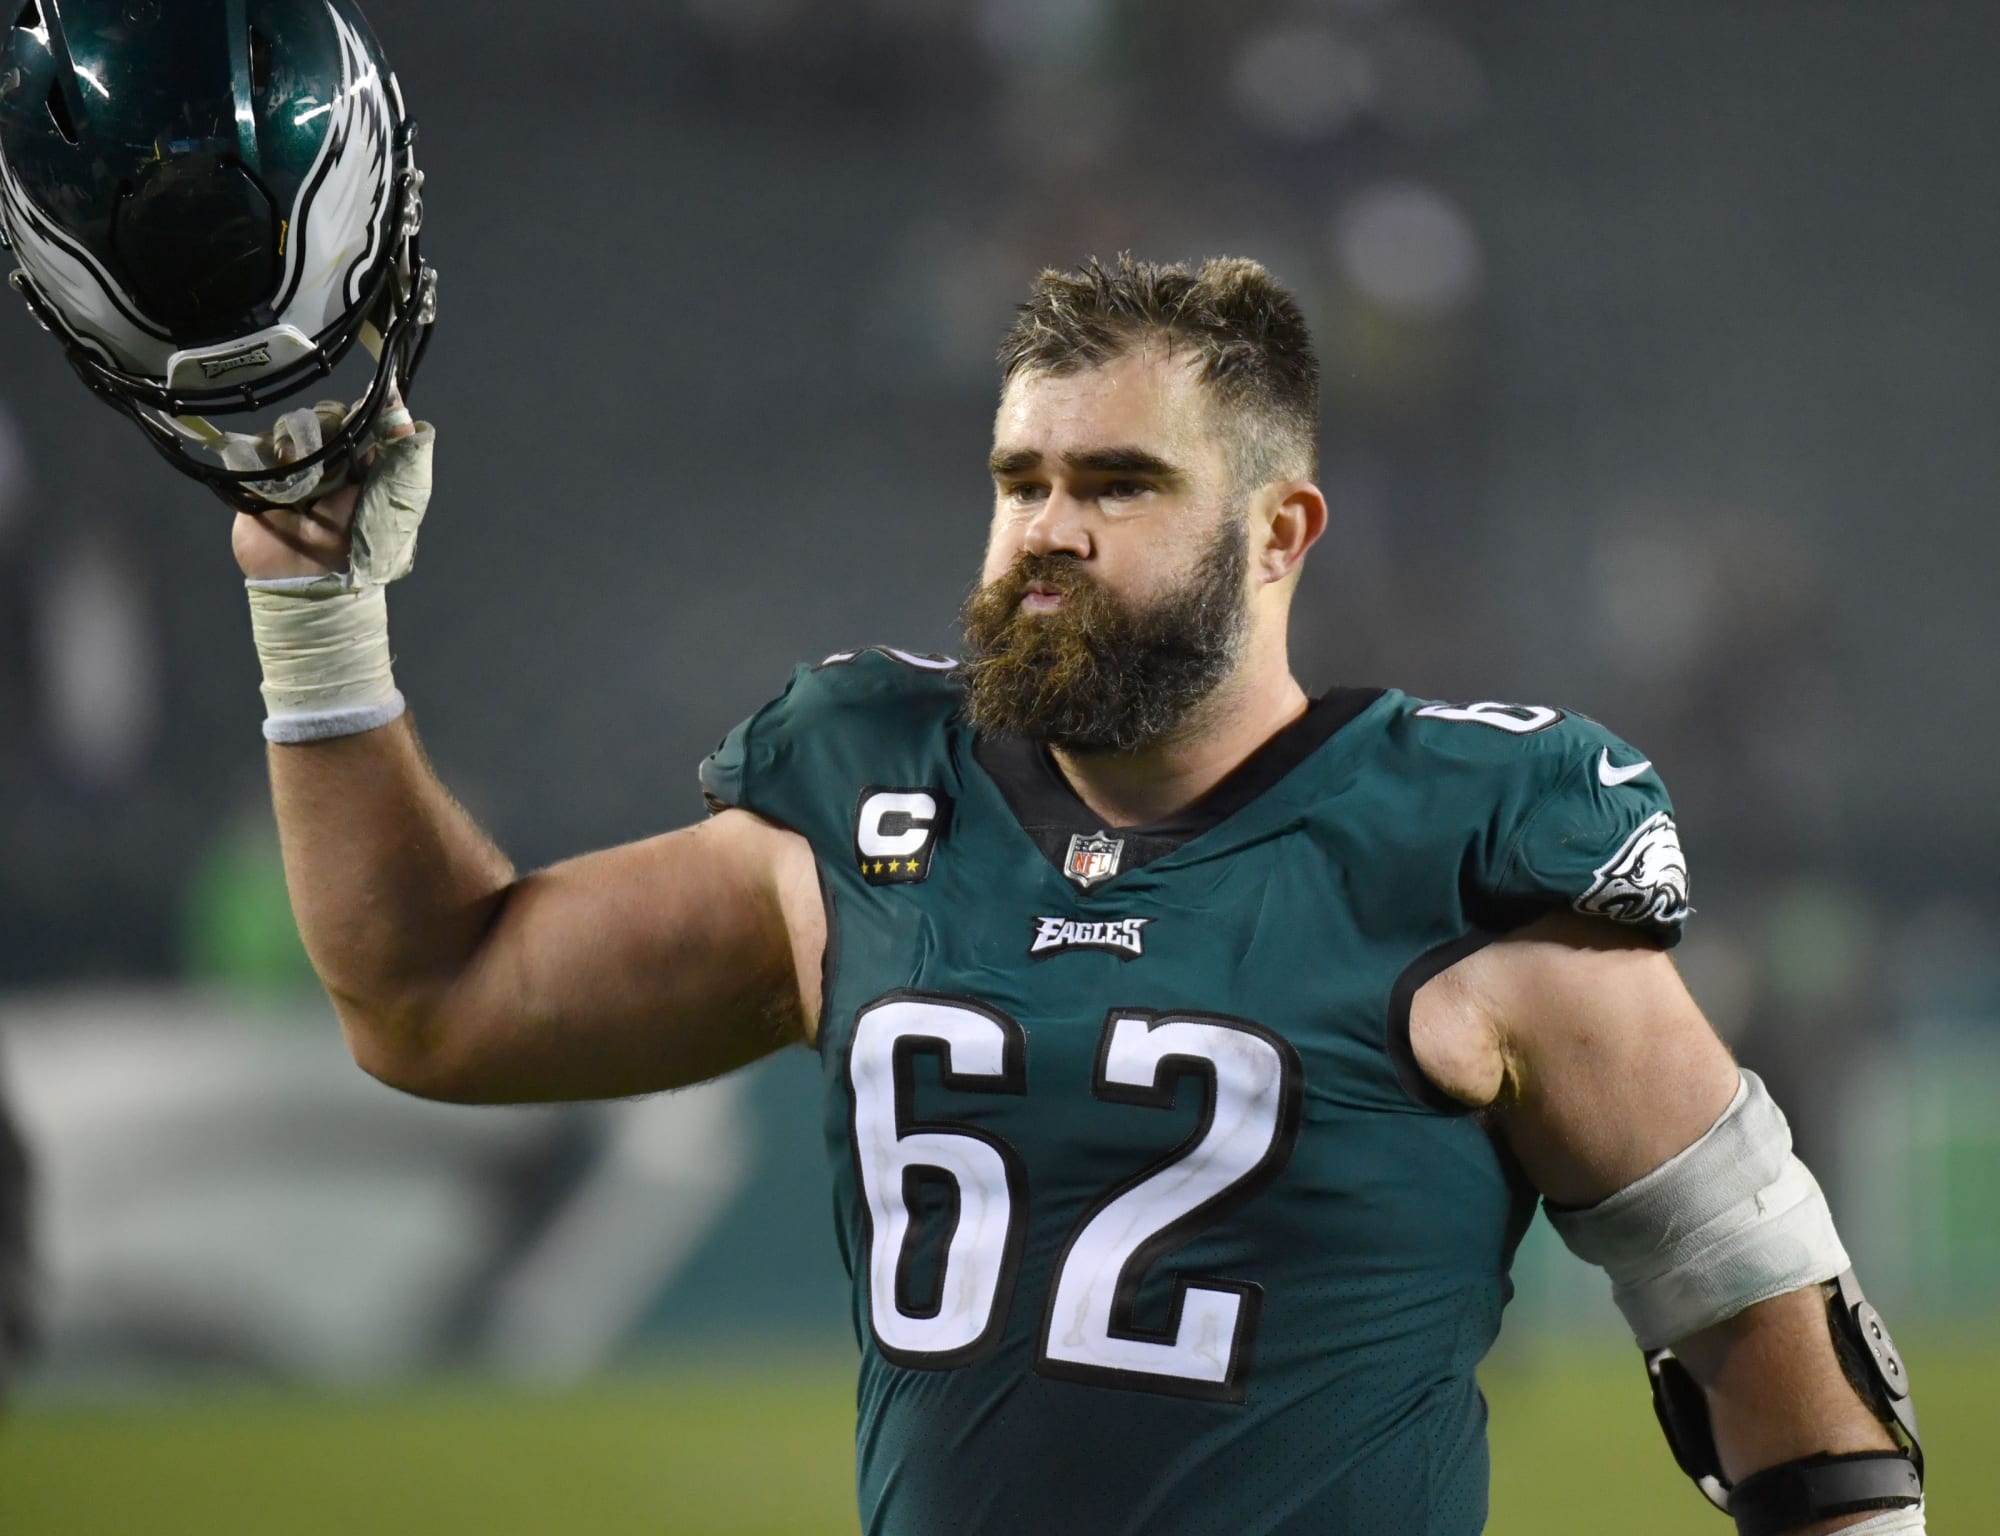 Eagles Jason Kelce sing ‘perfect’ national anthem at 76ers game [Video]